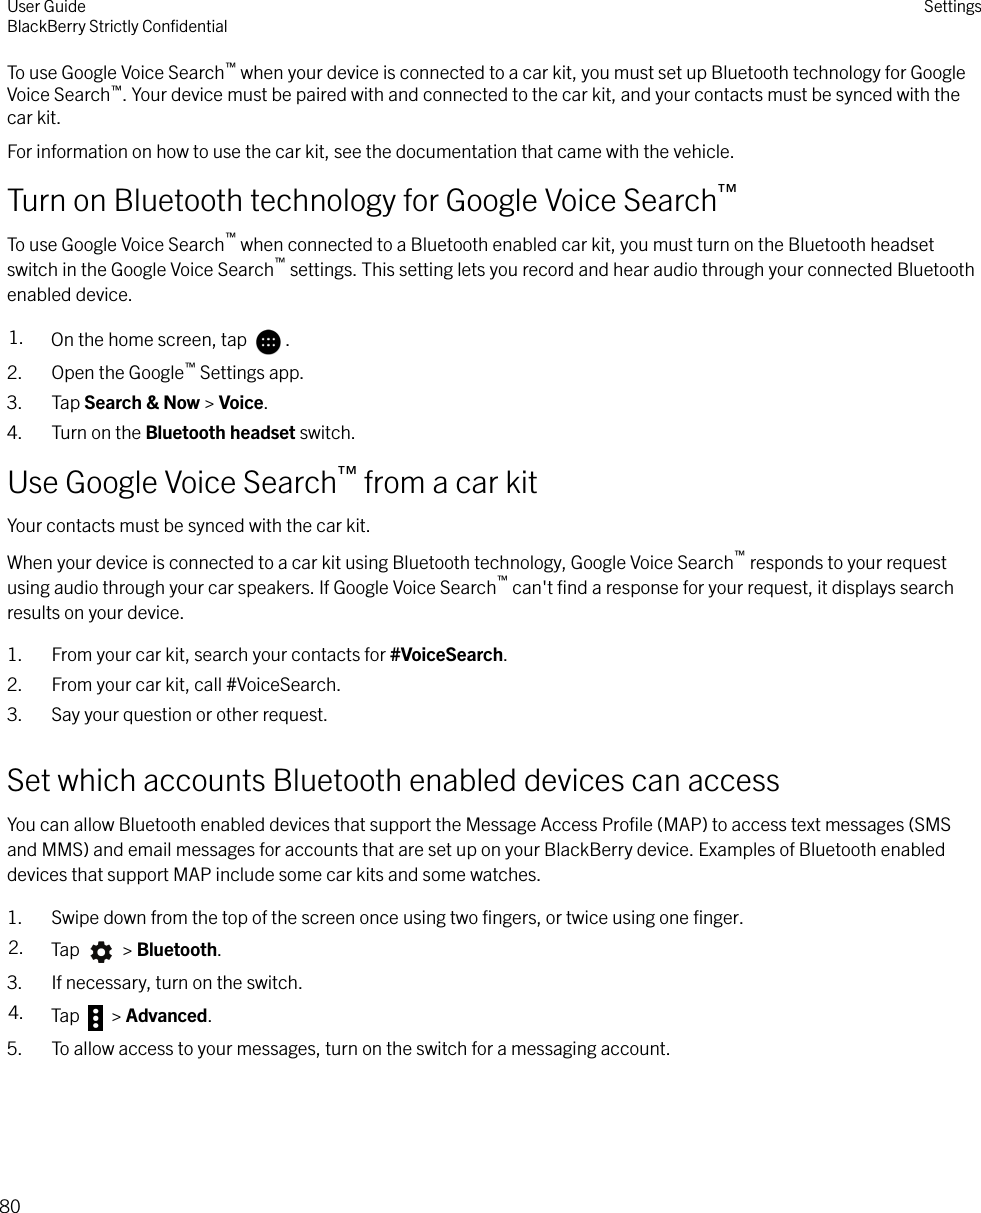 To use Google Voice Search™ when your device is connected to a car kit, you must set up Bluetooth technology for GoogleVoice Search™. Your device must be paired with and connected to the car kit, and your contacts must be synced with thecar kit.For information on how to use the car kit, see the documentation that came with the vehicle.Turn on Bluetooth technology for Google Voice Search™To use Google Voice Search™ when connected to a Bluetooth enabled car kit, you must turn on the Bluetooth headsetswitch in the Google Voice Search™ settings. This setting lets you record and hear audio through your connected Bluetoothenabled device.1. On the home screen, tap  .2. Open the Google™ Settings app.3. Tap Search &amp; Now &gt; Voice.4. Turn on the Bluetooth headset switch.Use Google Voice Search™ from a car kitYour contacts must be synced with the car kit.When your device is connected to a car kit using Bluetooth technology, Google Voice Search™ responds to your requestusing audio through your car speakers. If Google Voice Search™ can&apos;t ﬁnd a response for your request, it displays searchresults on your device.1. From your car kit, search your contacts for #VoiceSearch.2. From your car kit, call #VoiceSearch.3. Say your question or other request.Set which accounts Bluetooth enabled devices can accessYou can allow Bluetooth enabled devices that support the Message Access Proﬁle (MAP) to access text messages (SMSand MMS) and email messages for accounts that are set up on your BlackBerry device. Examples of Bluetooth enableddevices that support MAP include some car kits and some watches.1. Swipe down from the top of the screen once using two ﬁngers, or twice using one ﬁnger.2. Tap   &gt; Bluetooth.3. If necessary, turn on the switch.4. Tap   &gt; Advanced.5. To allow access to your messages, turn on the switch for a messaging account.User GuideBlackBerry Strictly ConﬁdentialSettings80